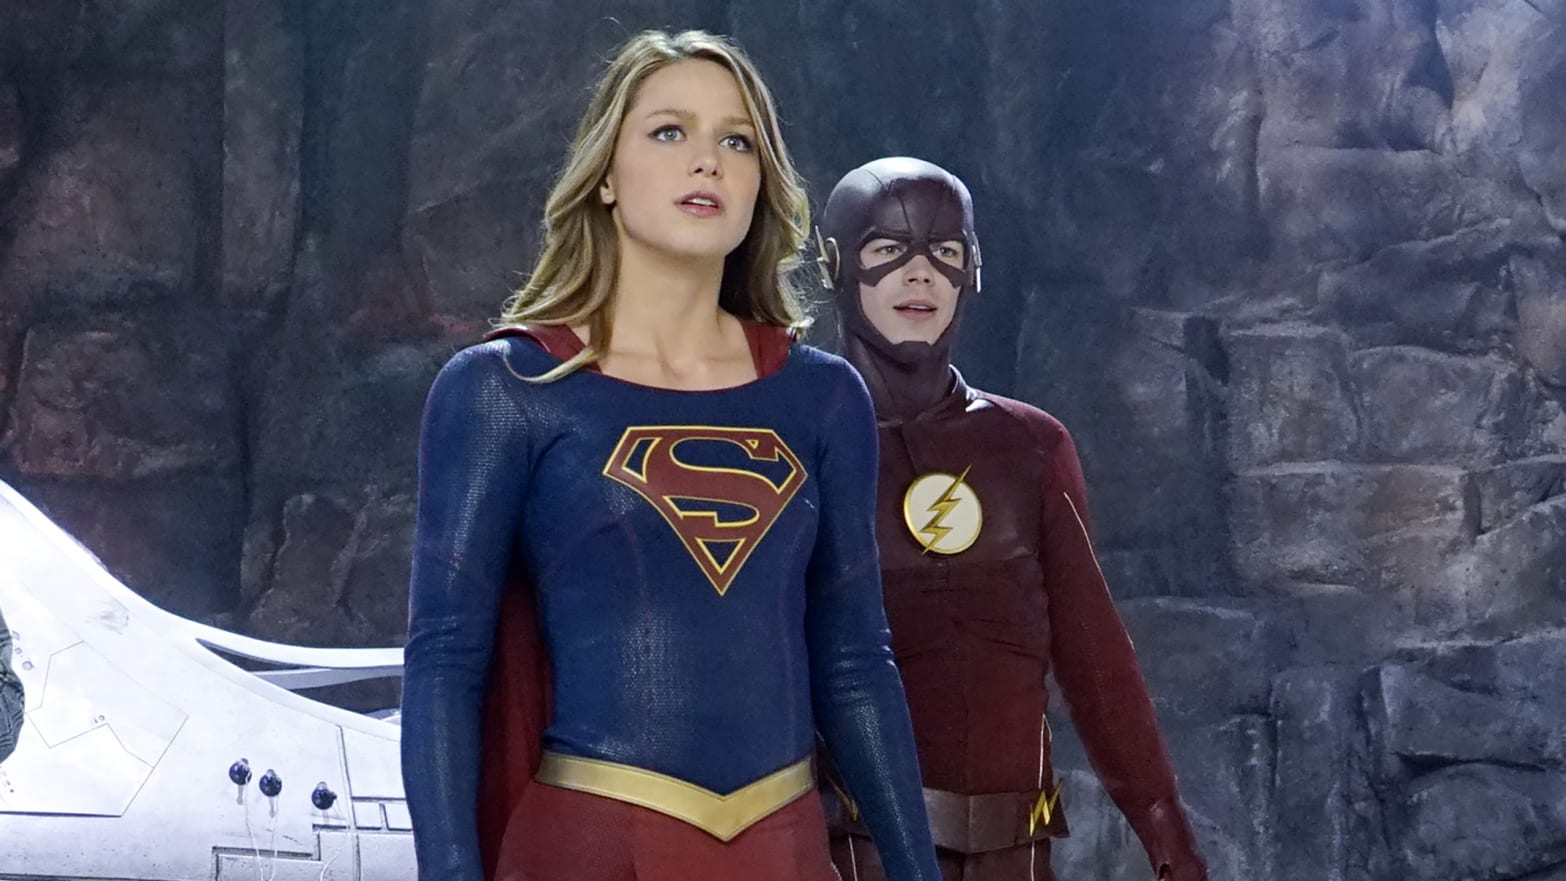 The Flash-Supergirl Crossover Was Everything Batman v Superman Was photo picture picture